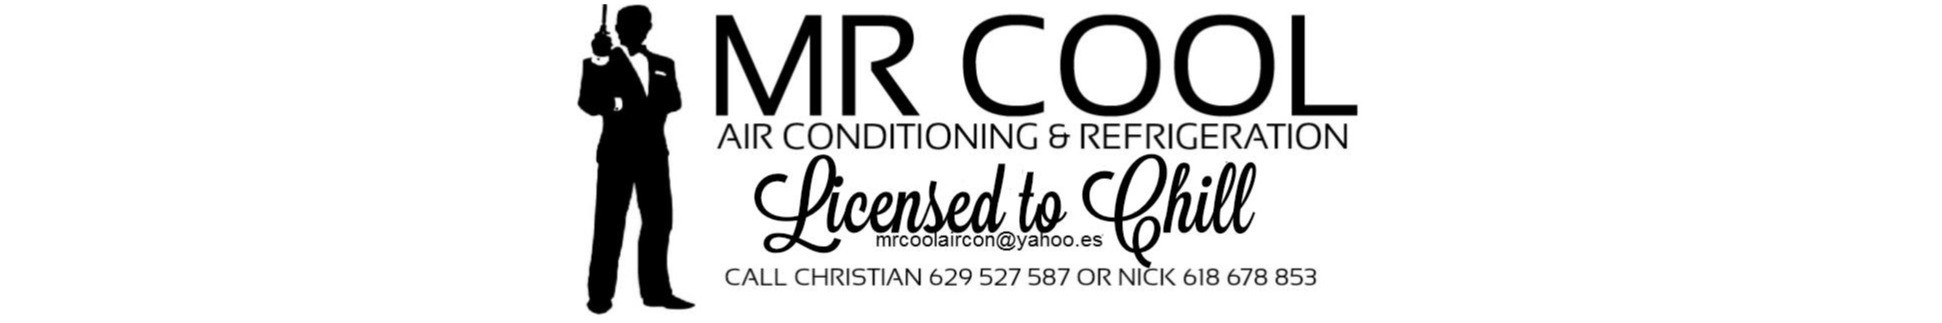 Mr Cool Air Conditioning & Refrigeration